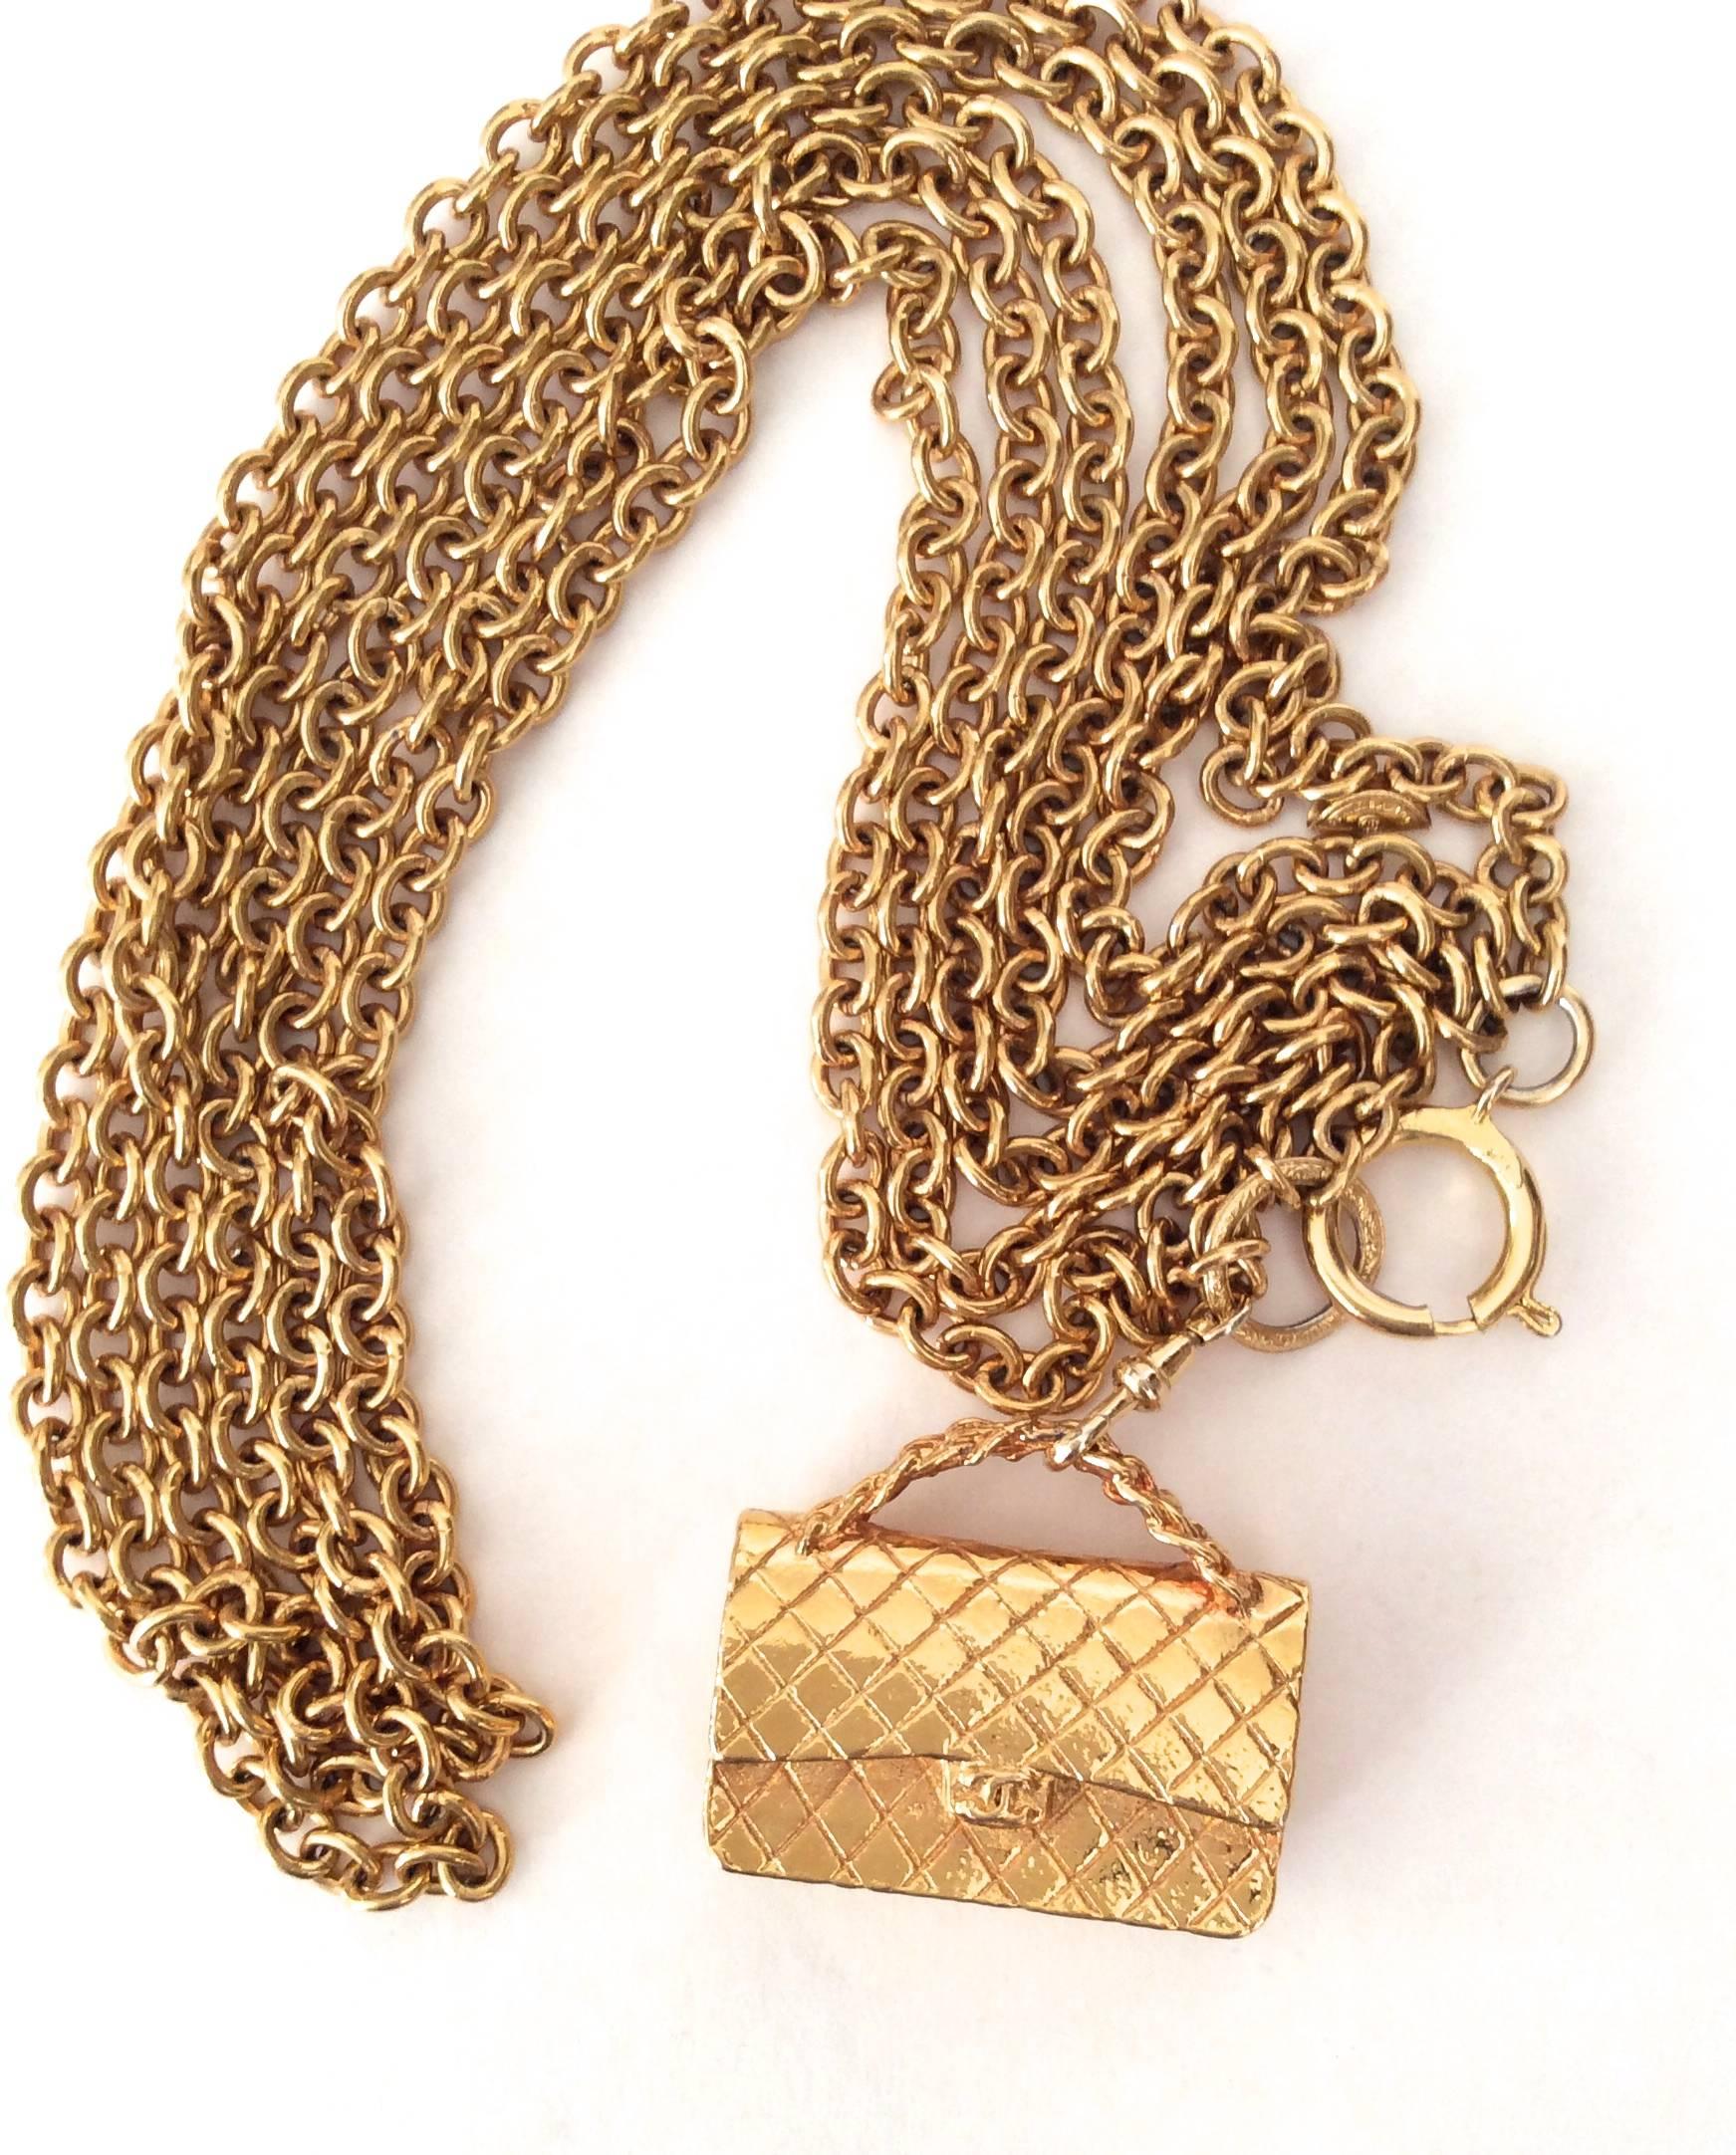 Gold Tone Chanel Triple Chain Necklace with Iconic Purse Pendant 5